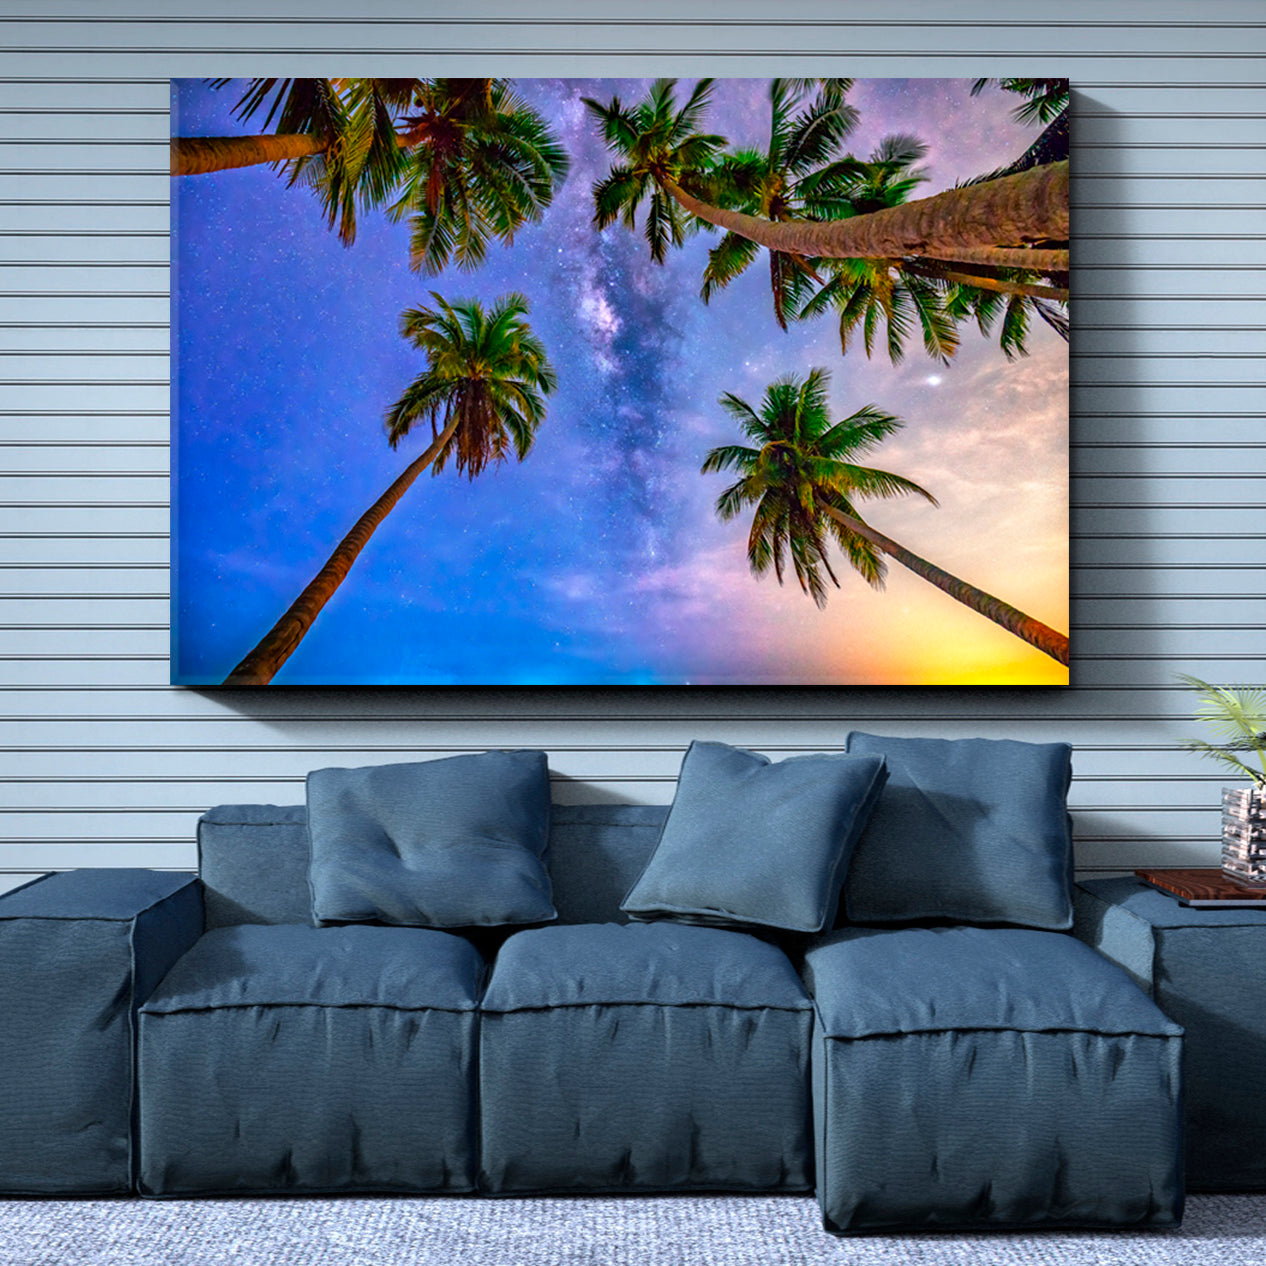 Coconut Palms Trees Milky Way Sky on a beautiful Summer Night Landscape Tropical, Exotic Art Print Artesty 1 panel 24" x 16" 